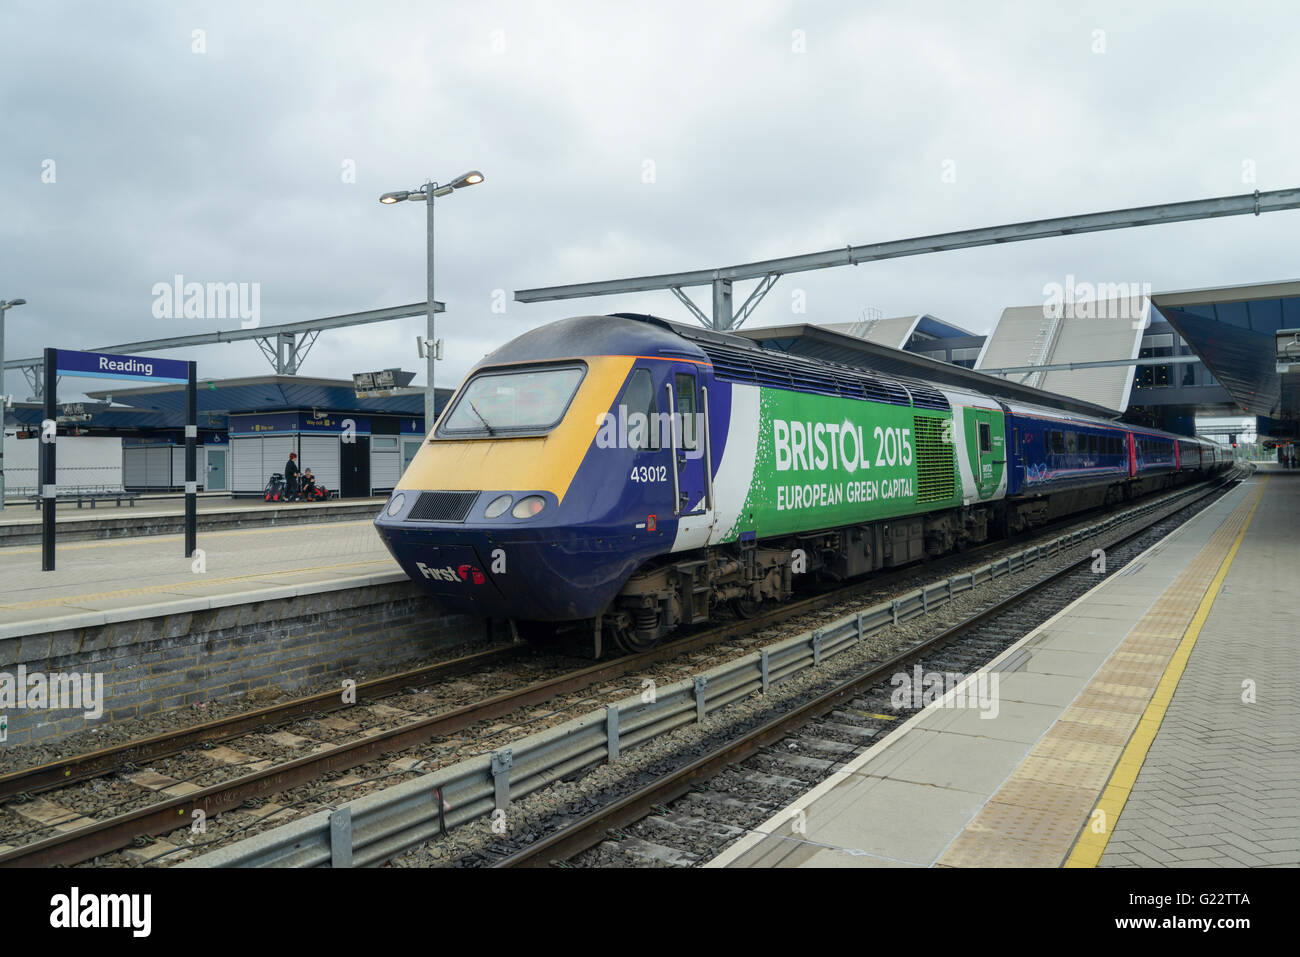 HST 43012 at Reading Station in Bristol 2015 Livery -1 Stock Photo